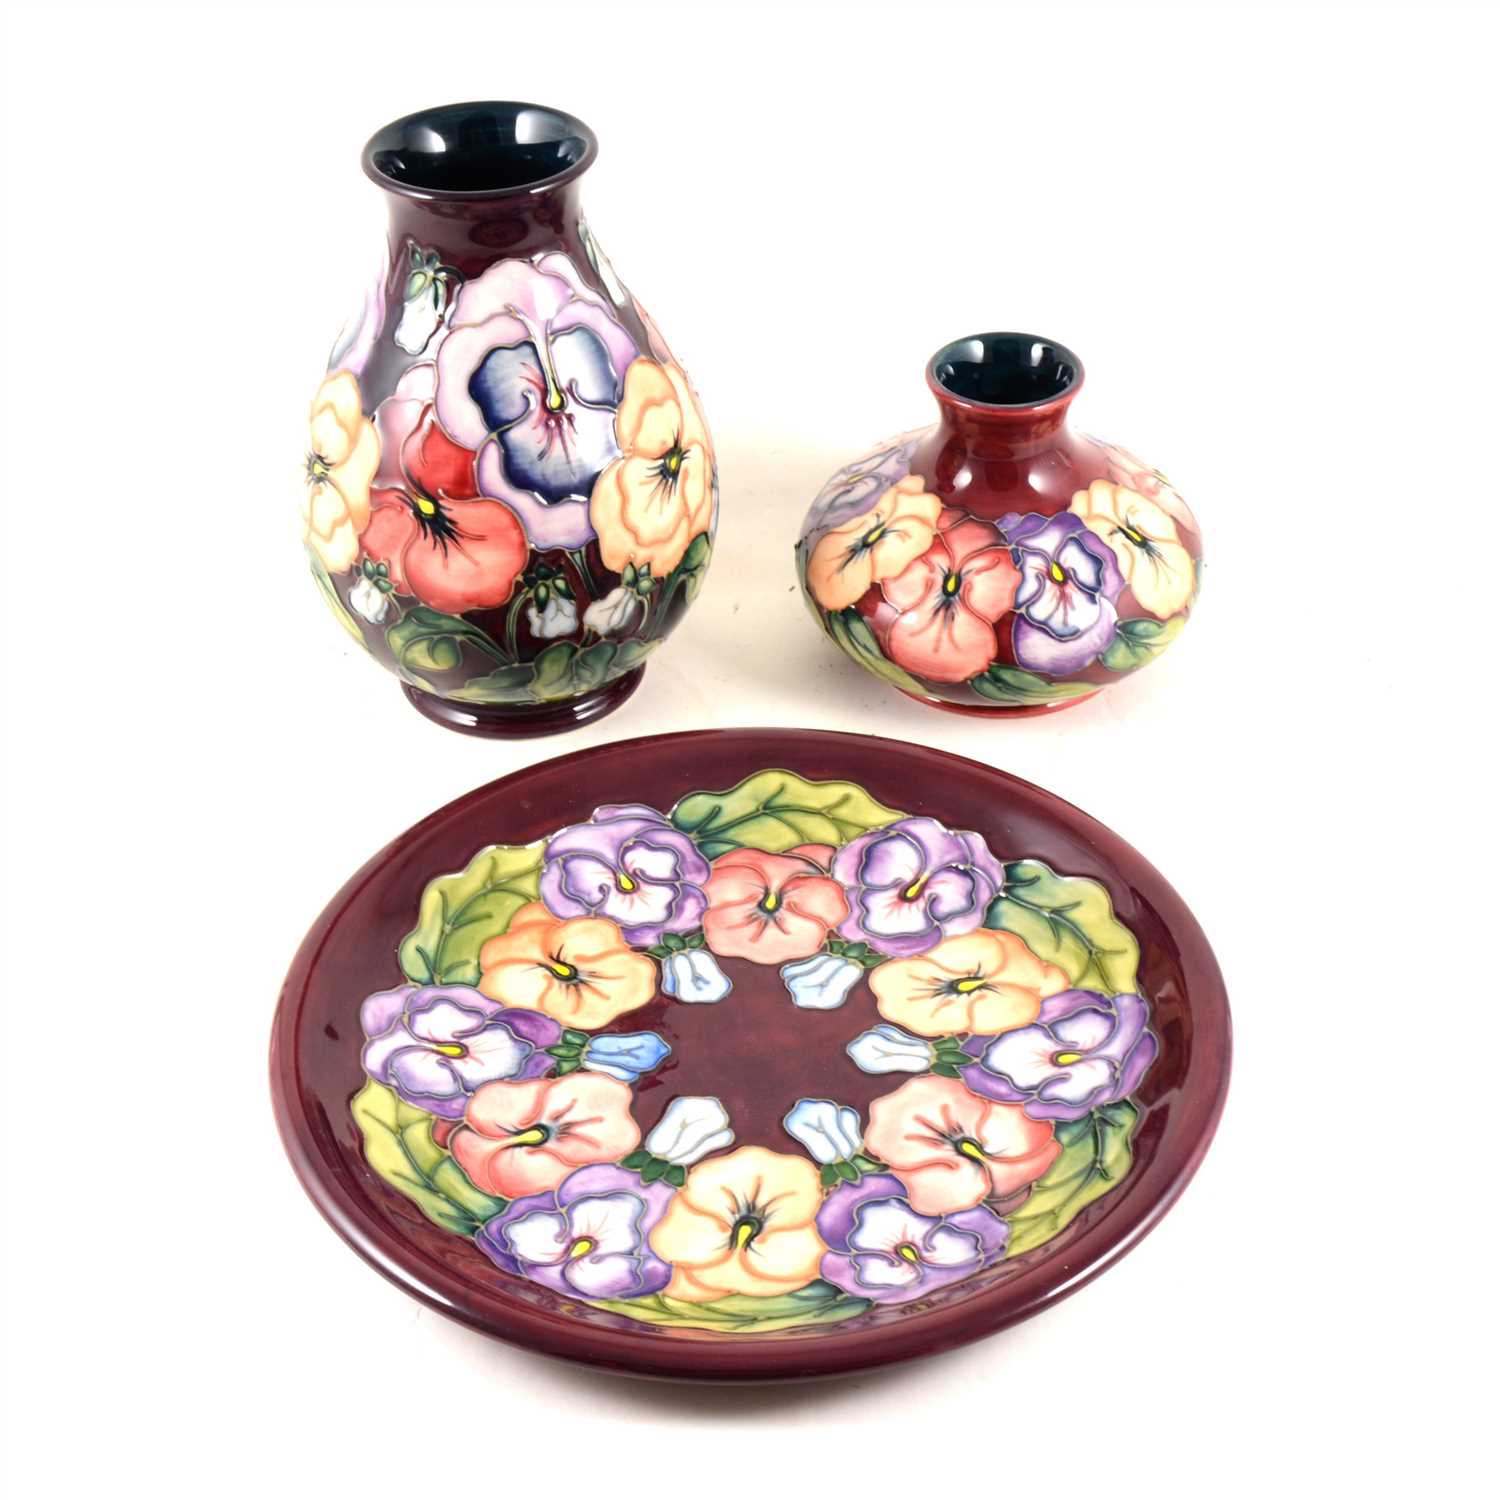 Lot 40 - A Moorcroft Pottery plate, "Pansy" designed by Rachel Bishop, 1994, 25.8cm diameter, and two vases of the same design and date, 11cm and 19cm.